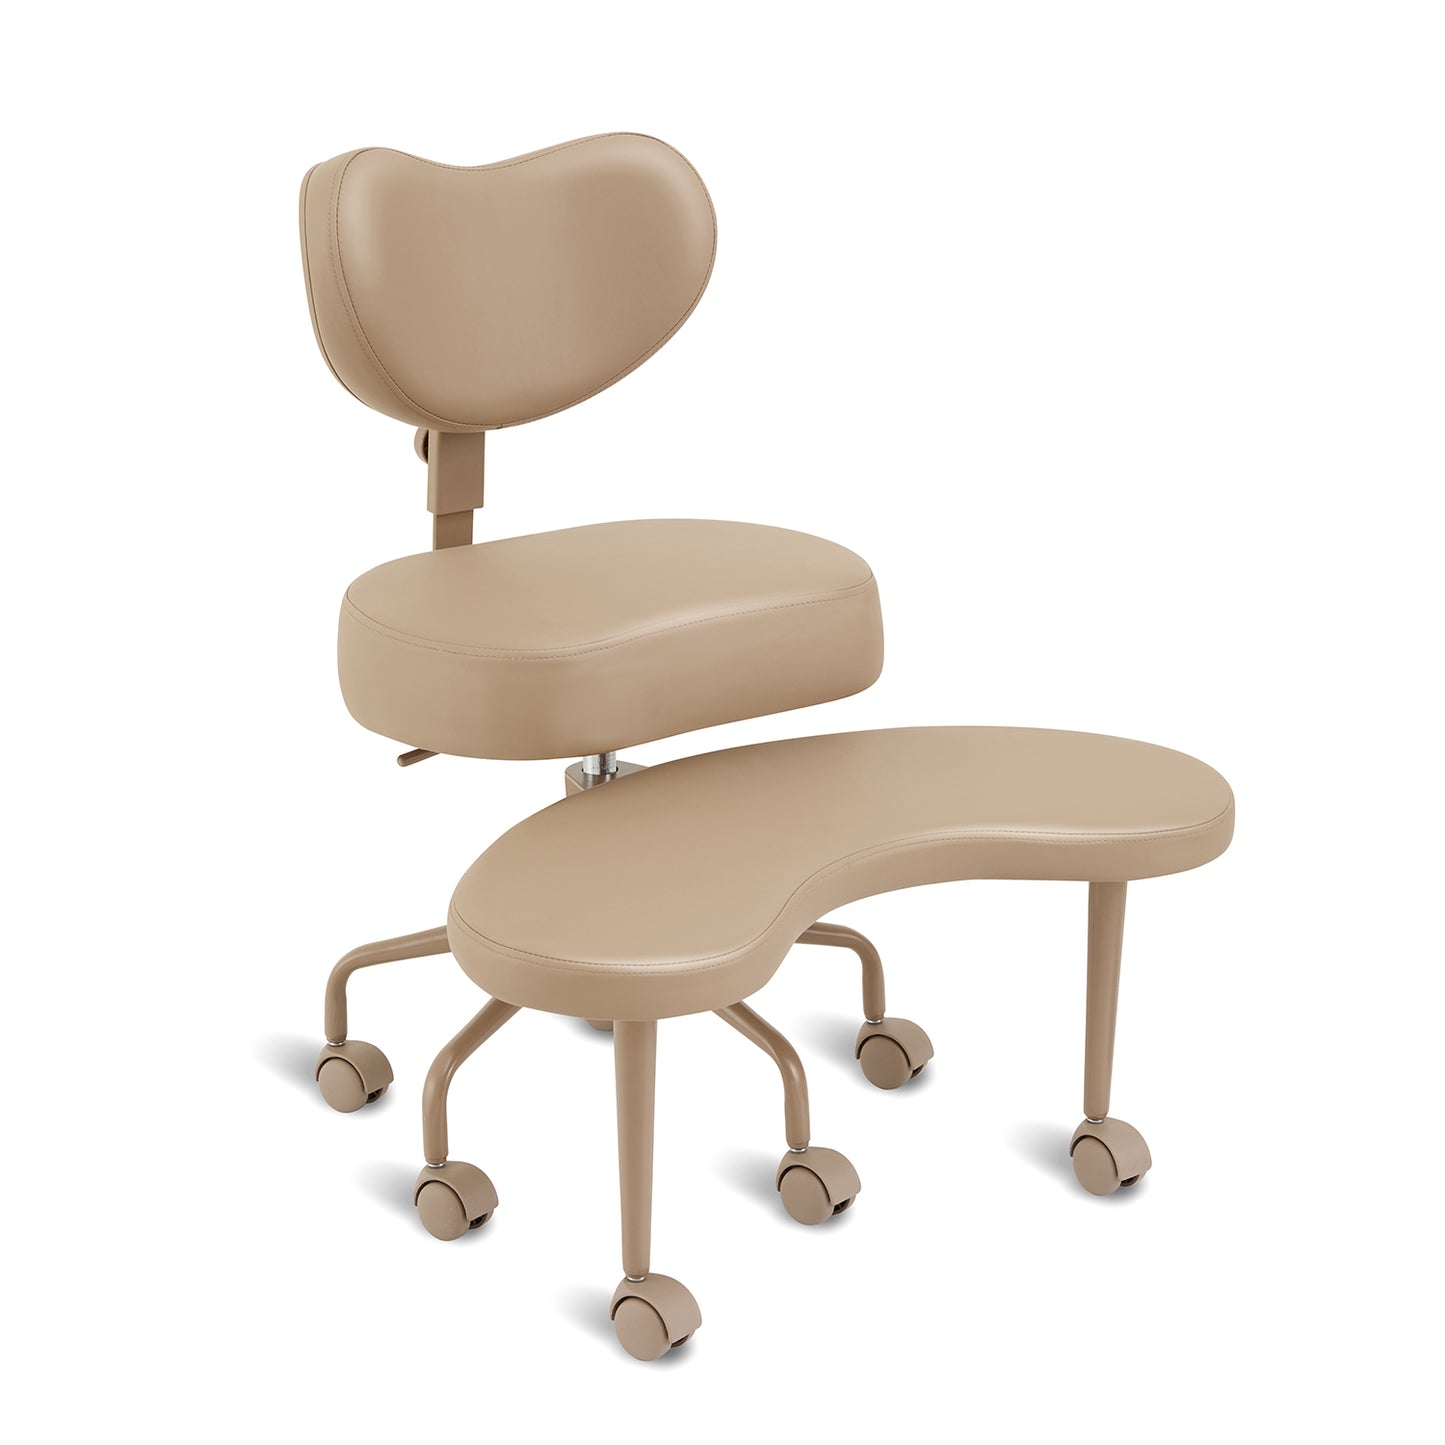 Pipersong Meditation Chair - Pro